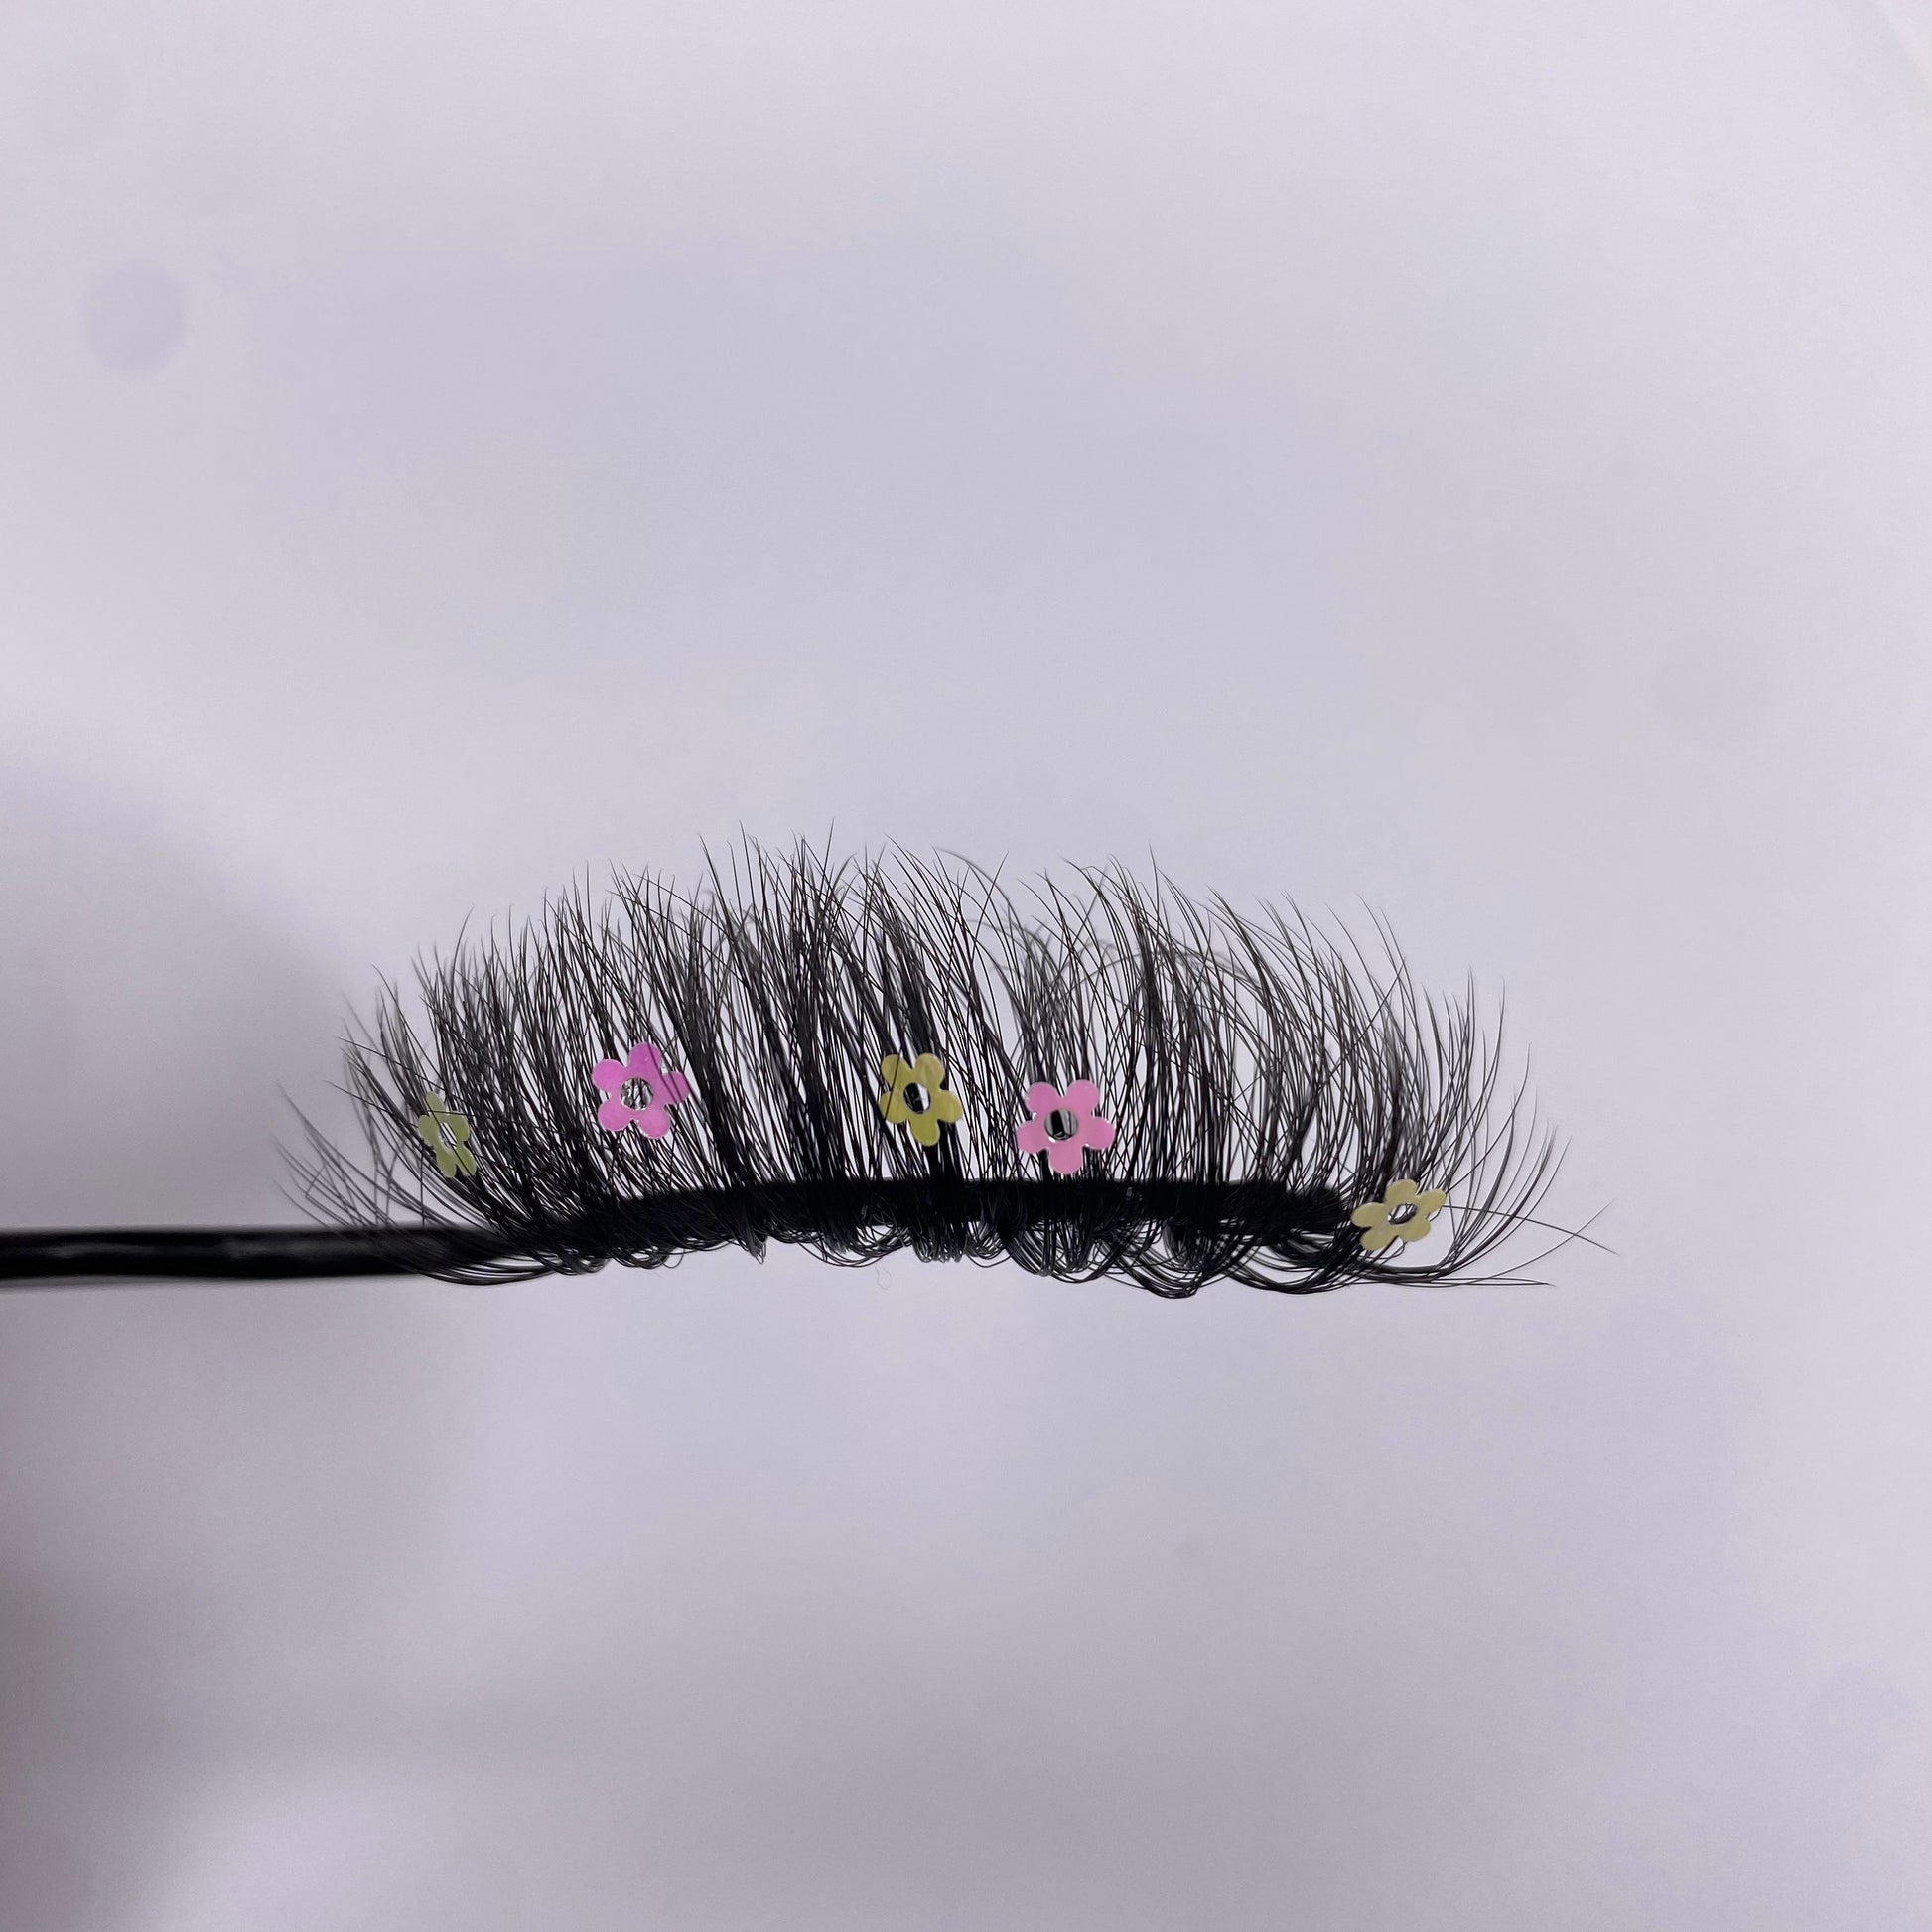 25mm cat eye dramatic strip lash with decals